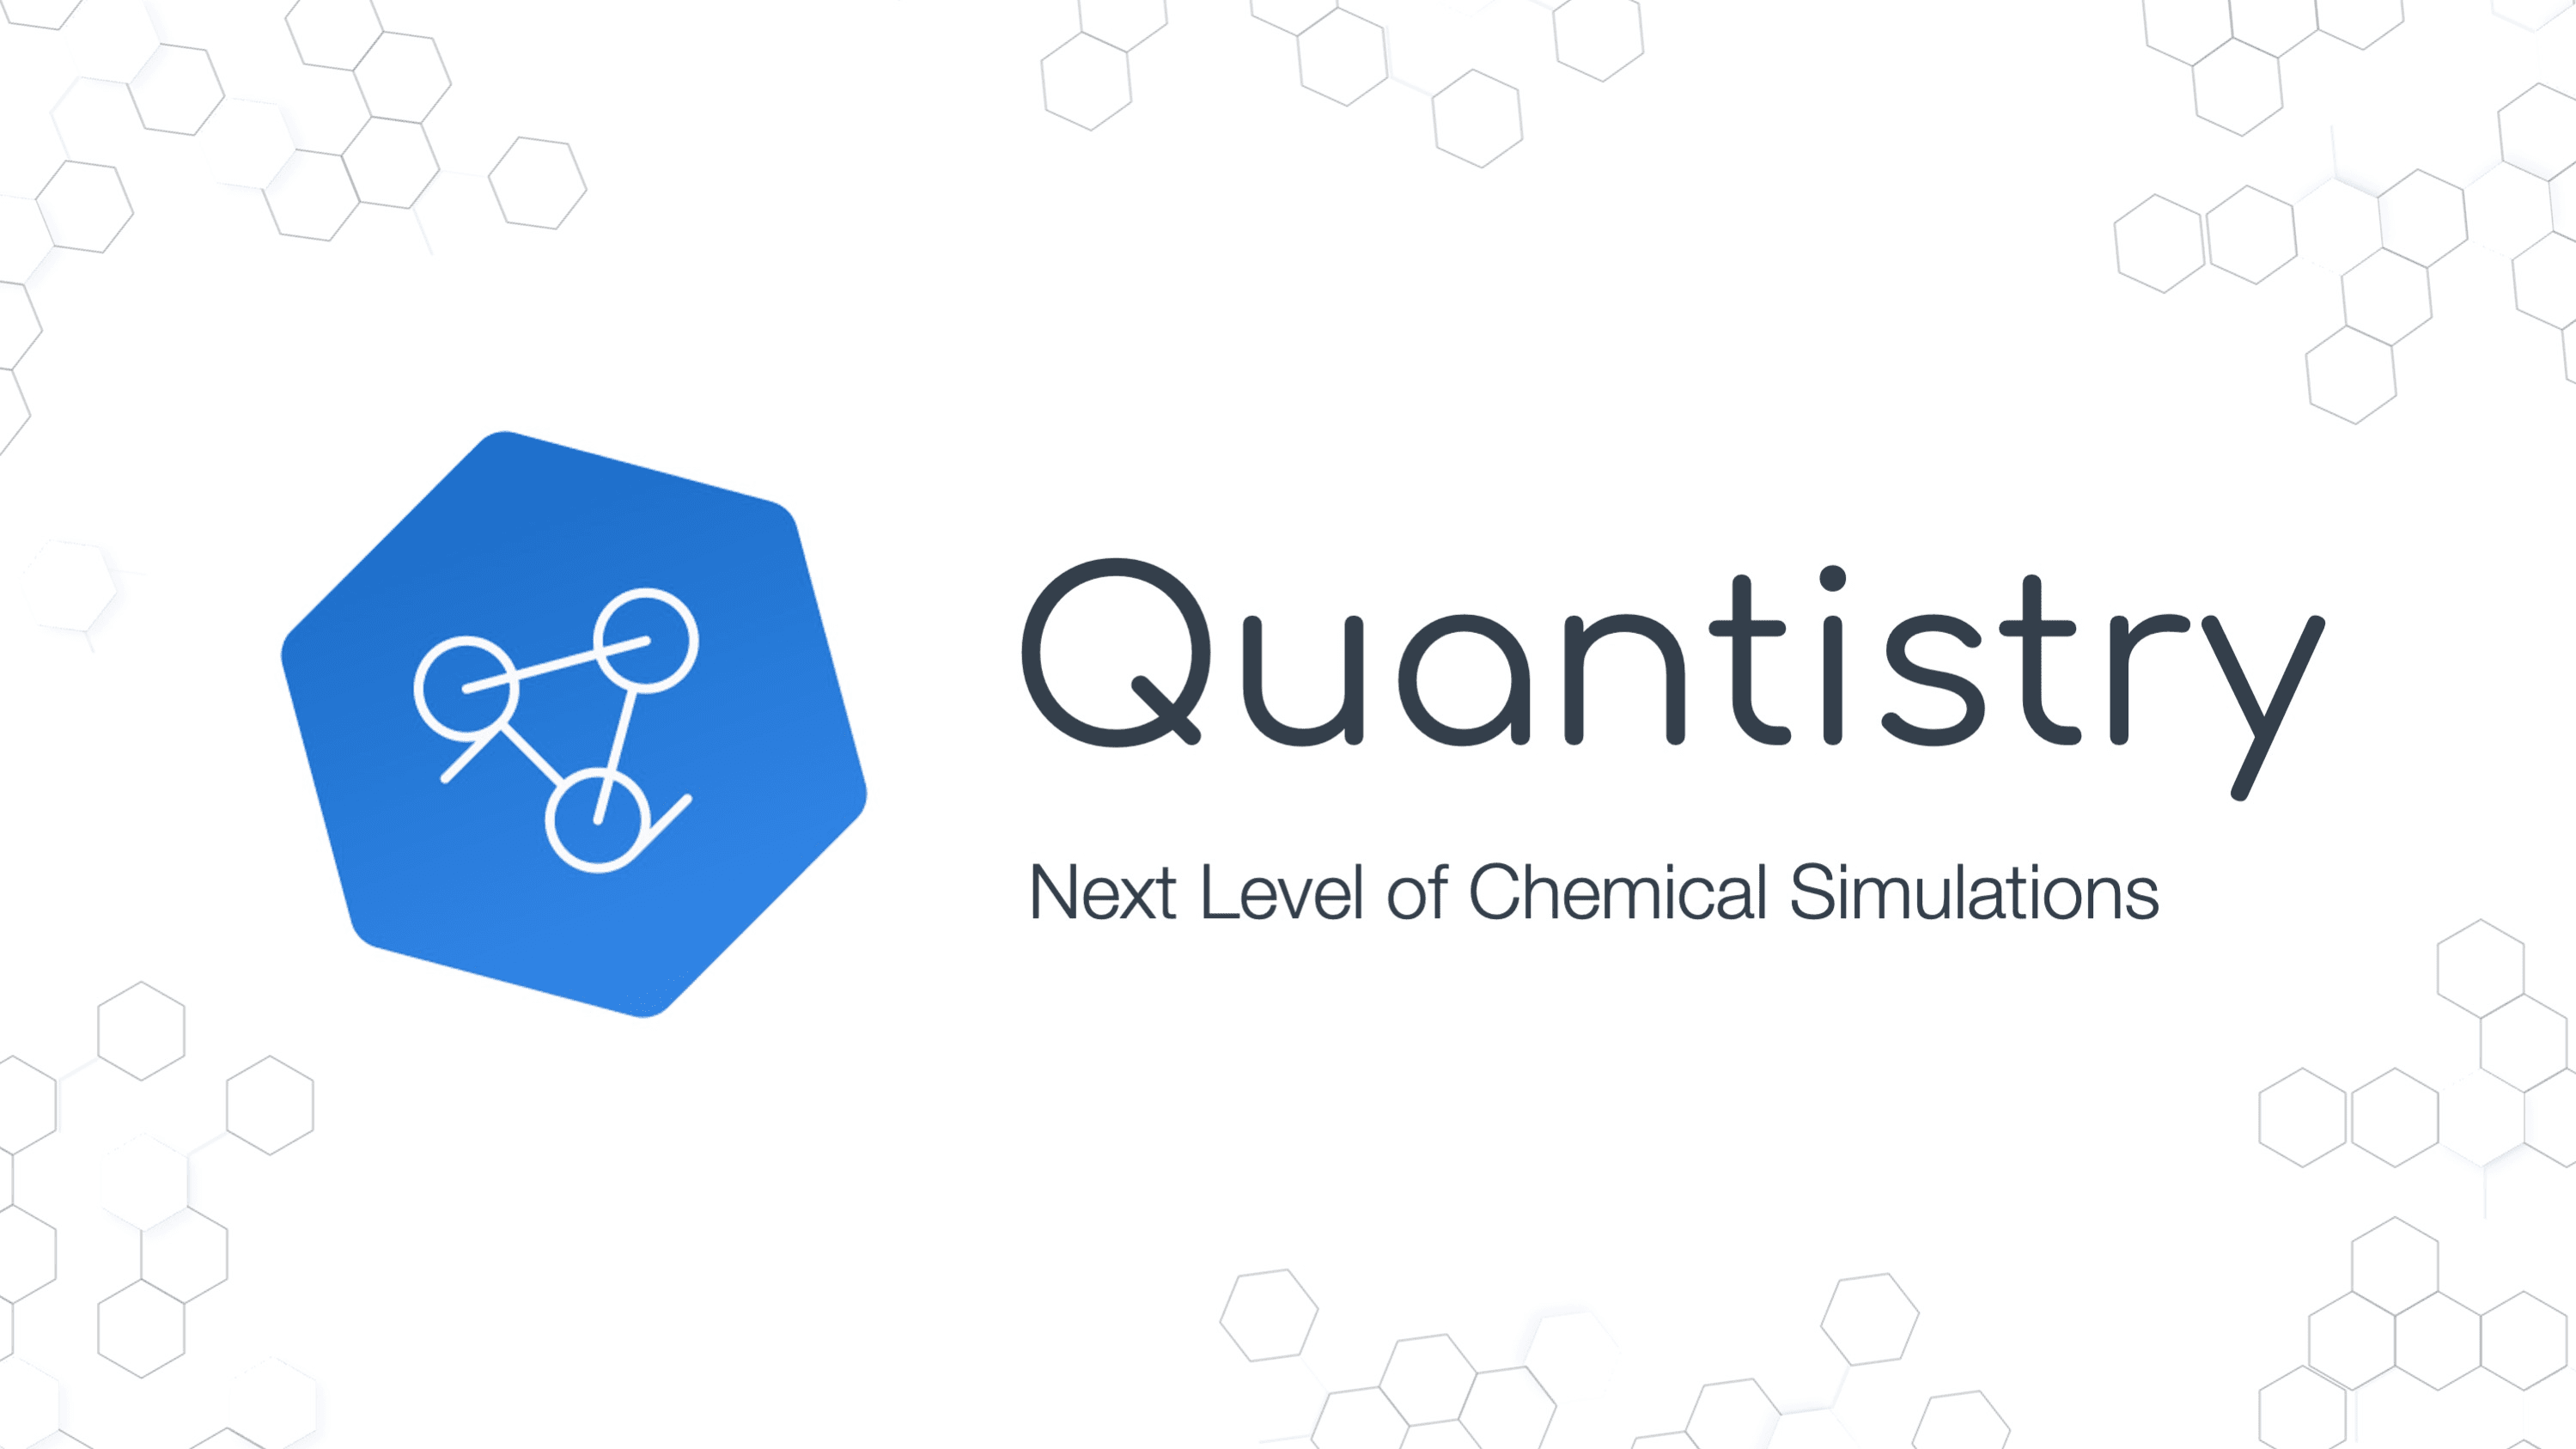 About Quantistry | Quantistry